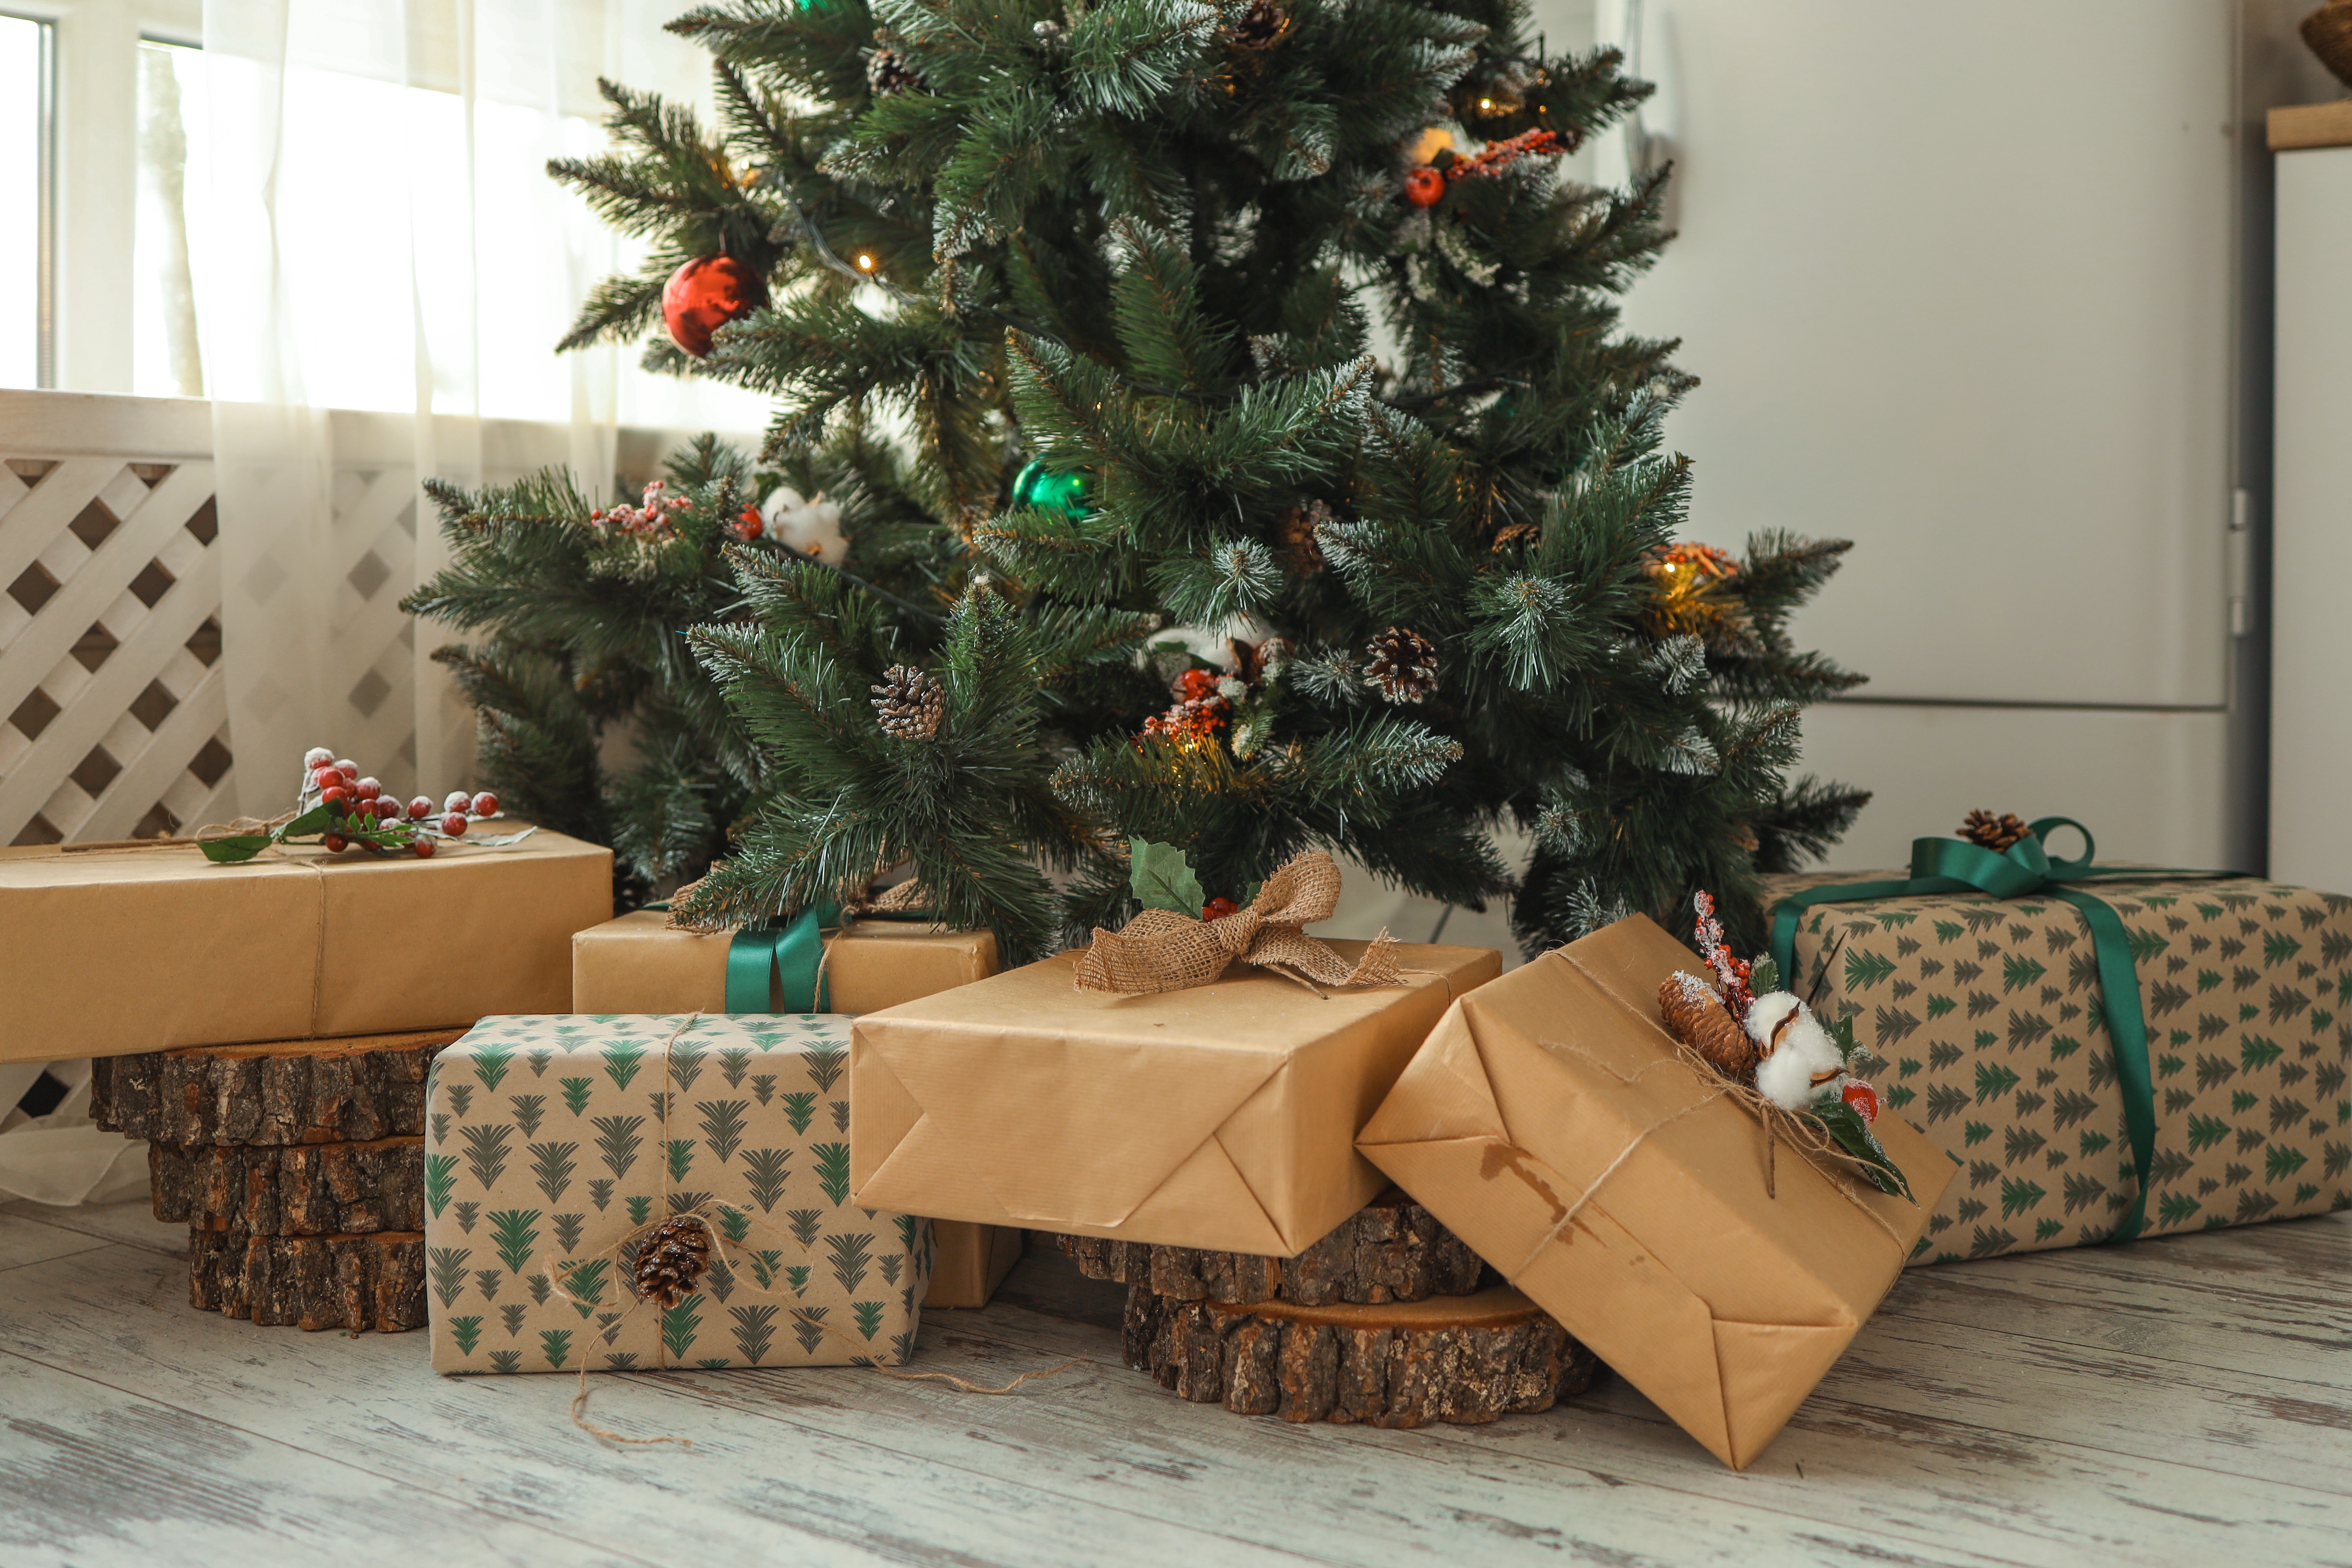 A Christmas tree with present under it | Source: Shutterstock